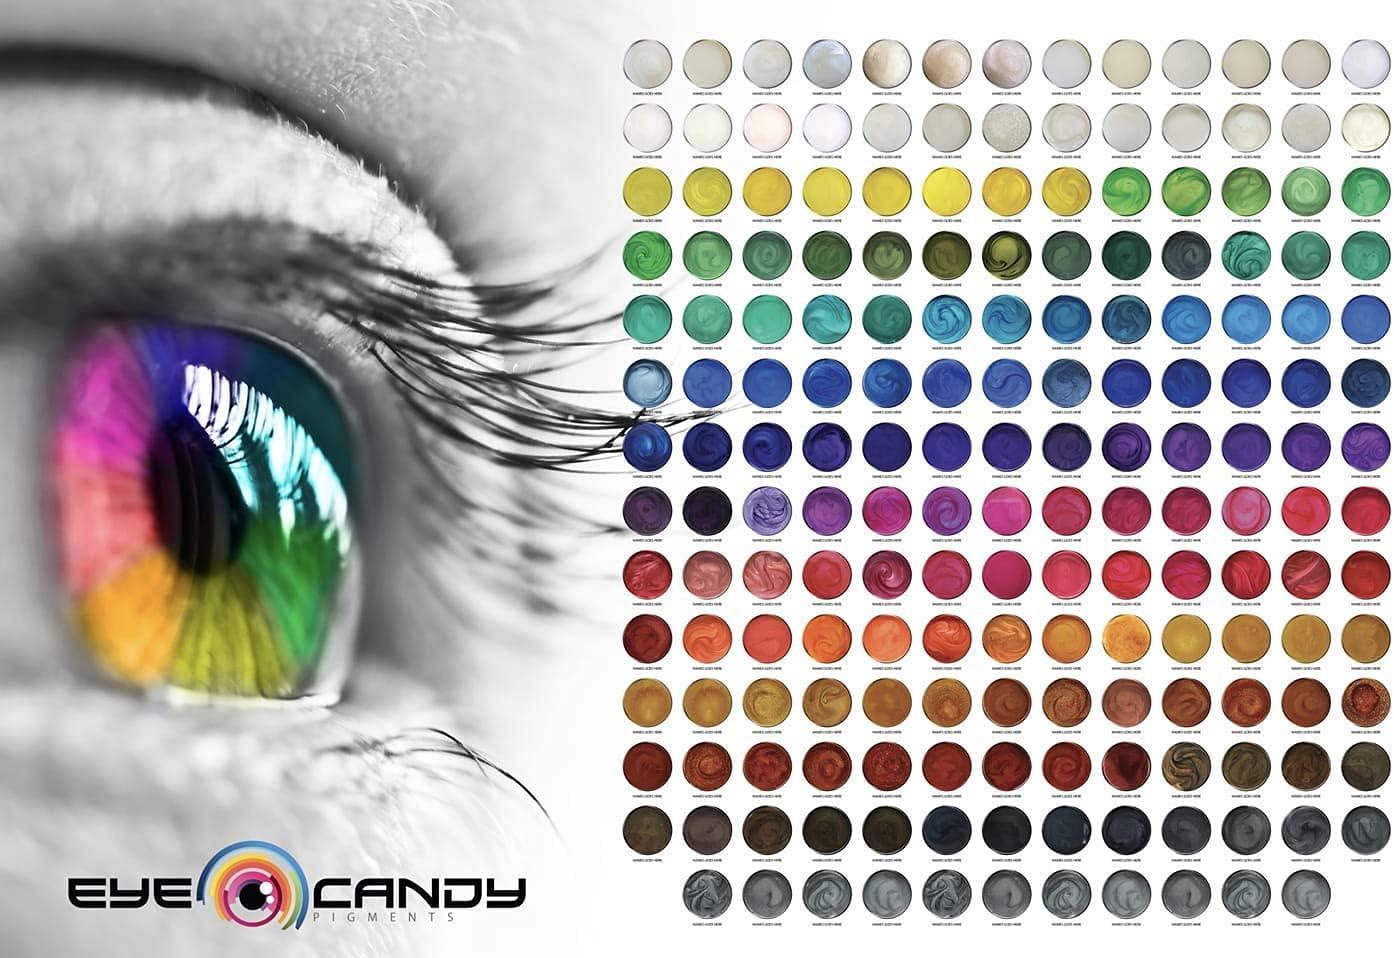 Eye Candy Pearls Pigments Variety Mica Pigment Powder Set A - Epoxy Resin Art - Woodworking - Cosmetic Grade Mica Powder - Bath Bombs - Pigment